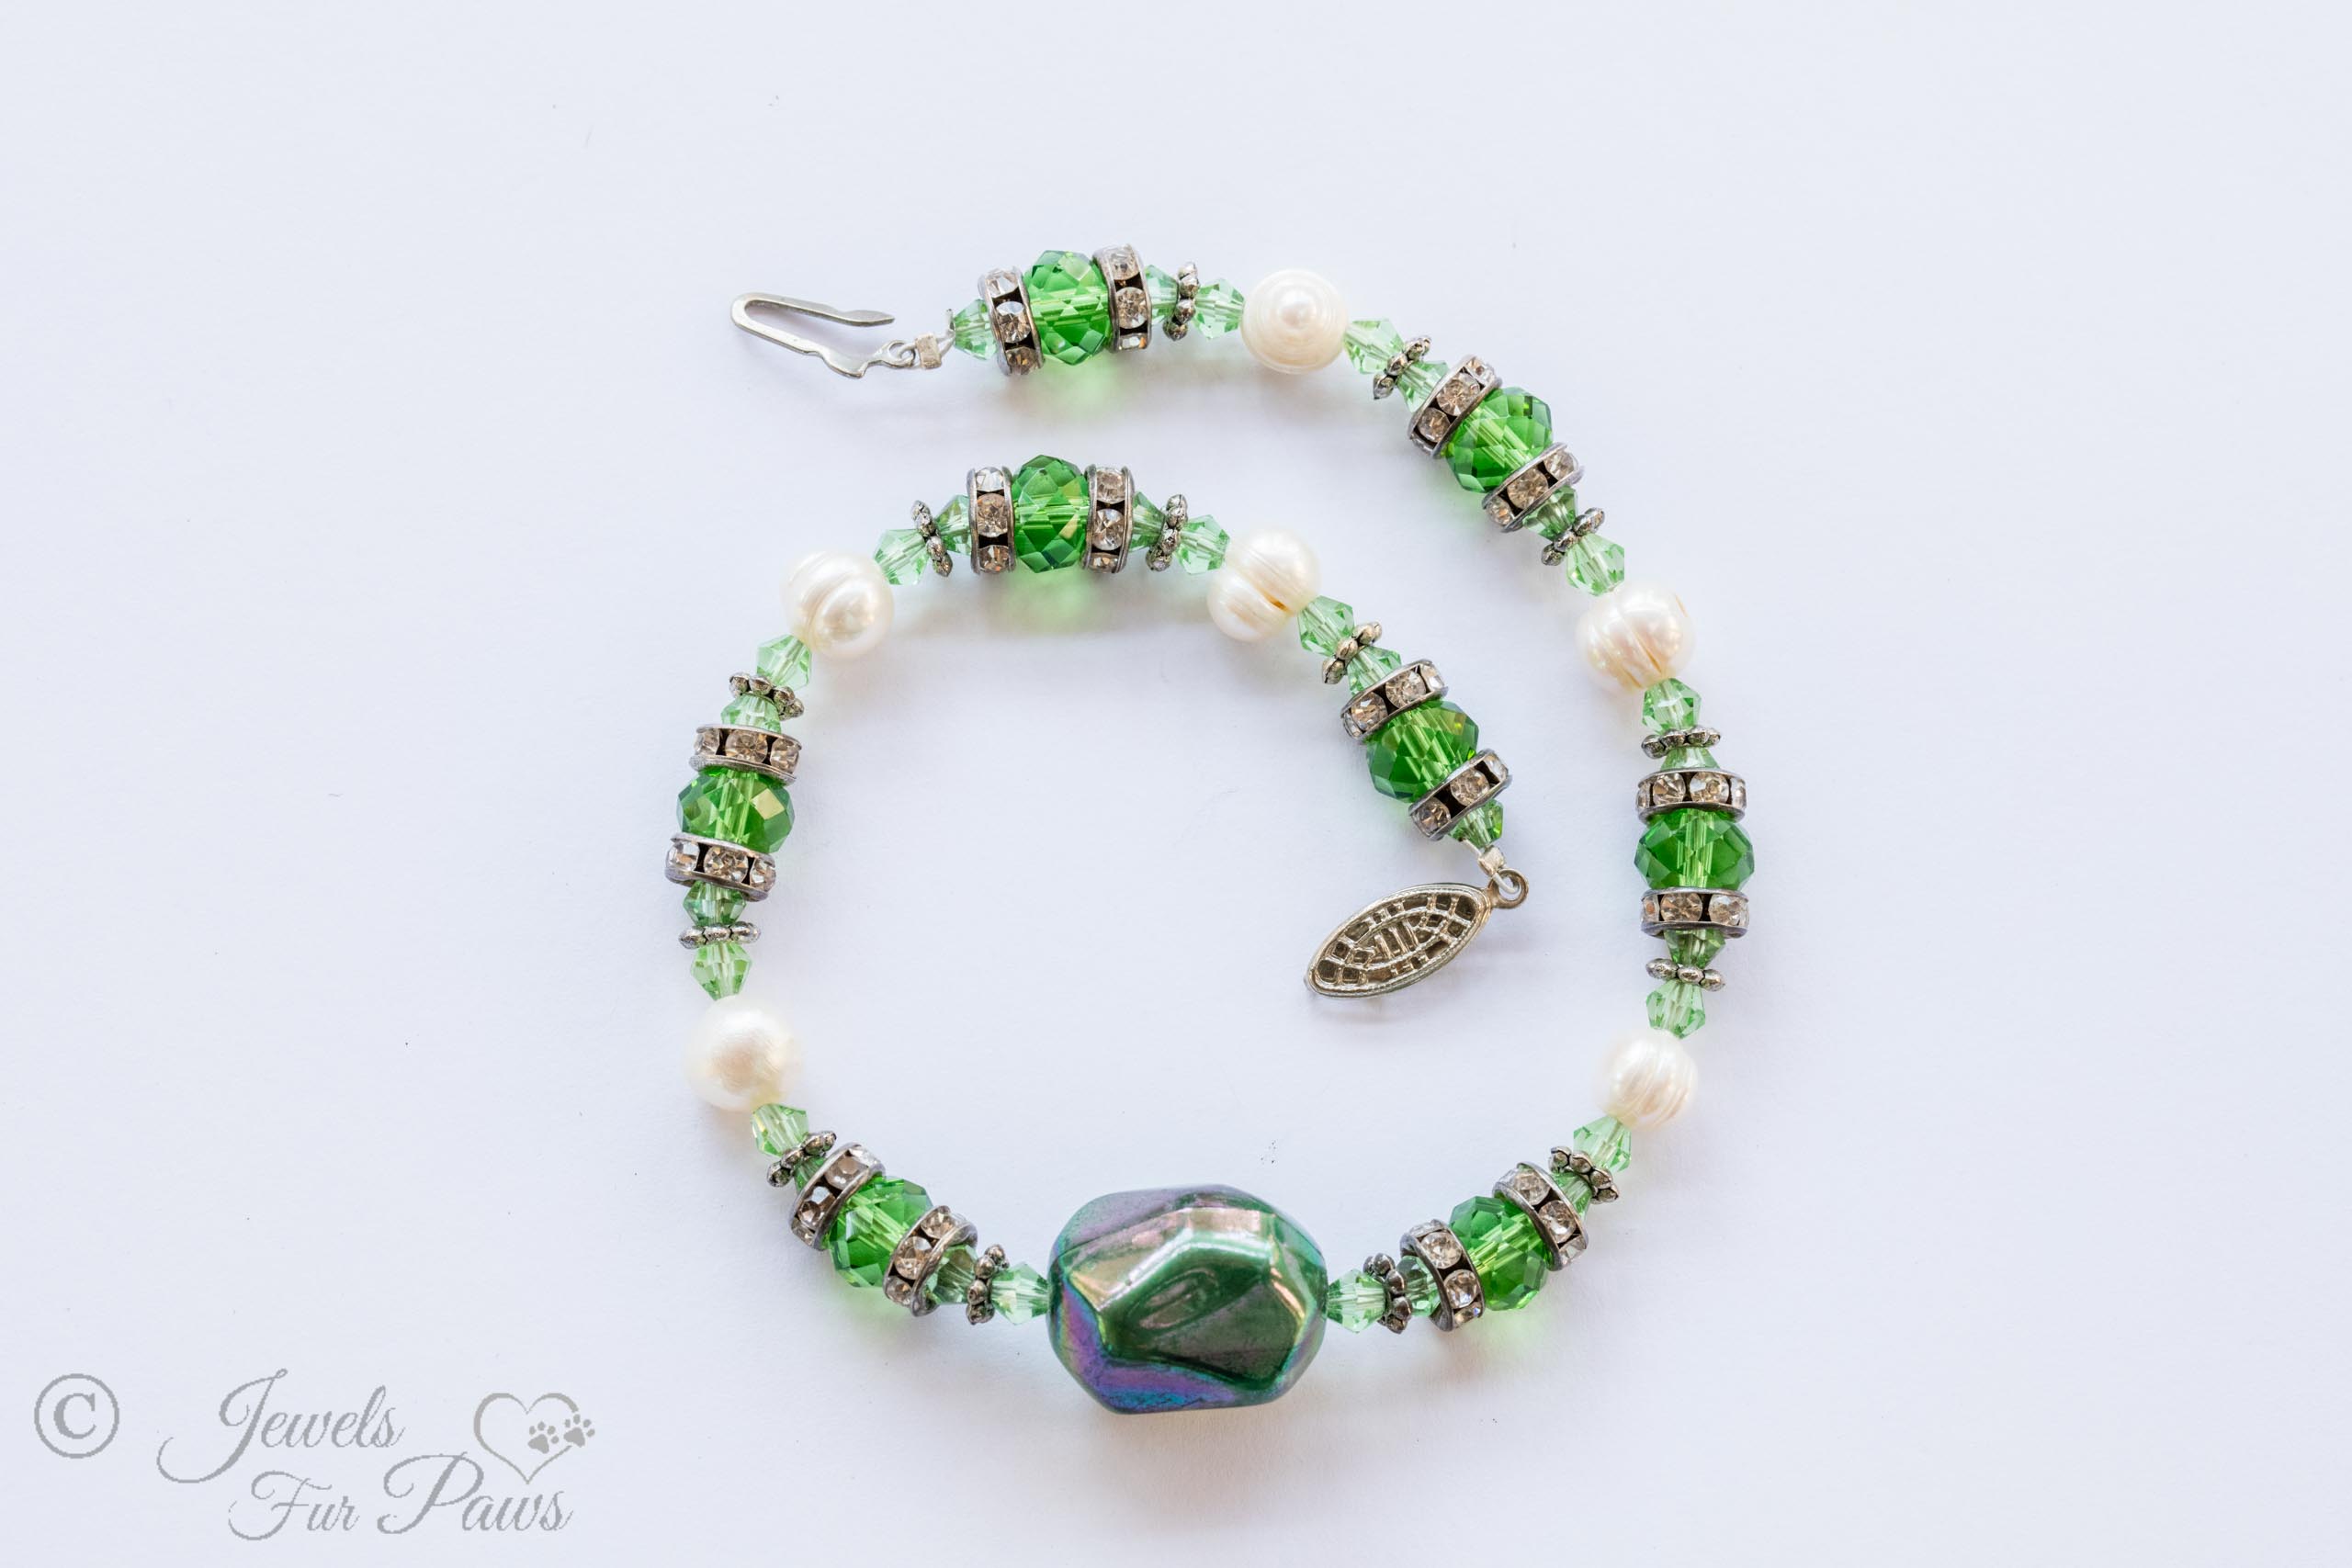 iridescent green bauble bead with green Czech crystals, cultured pearls, channel set rhinestone separators for small dogs, cats on white background